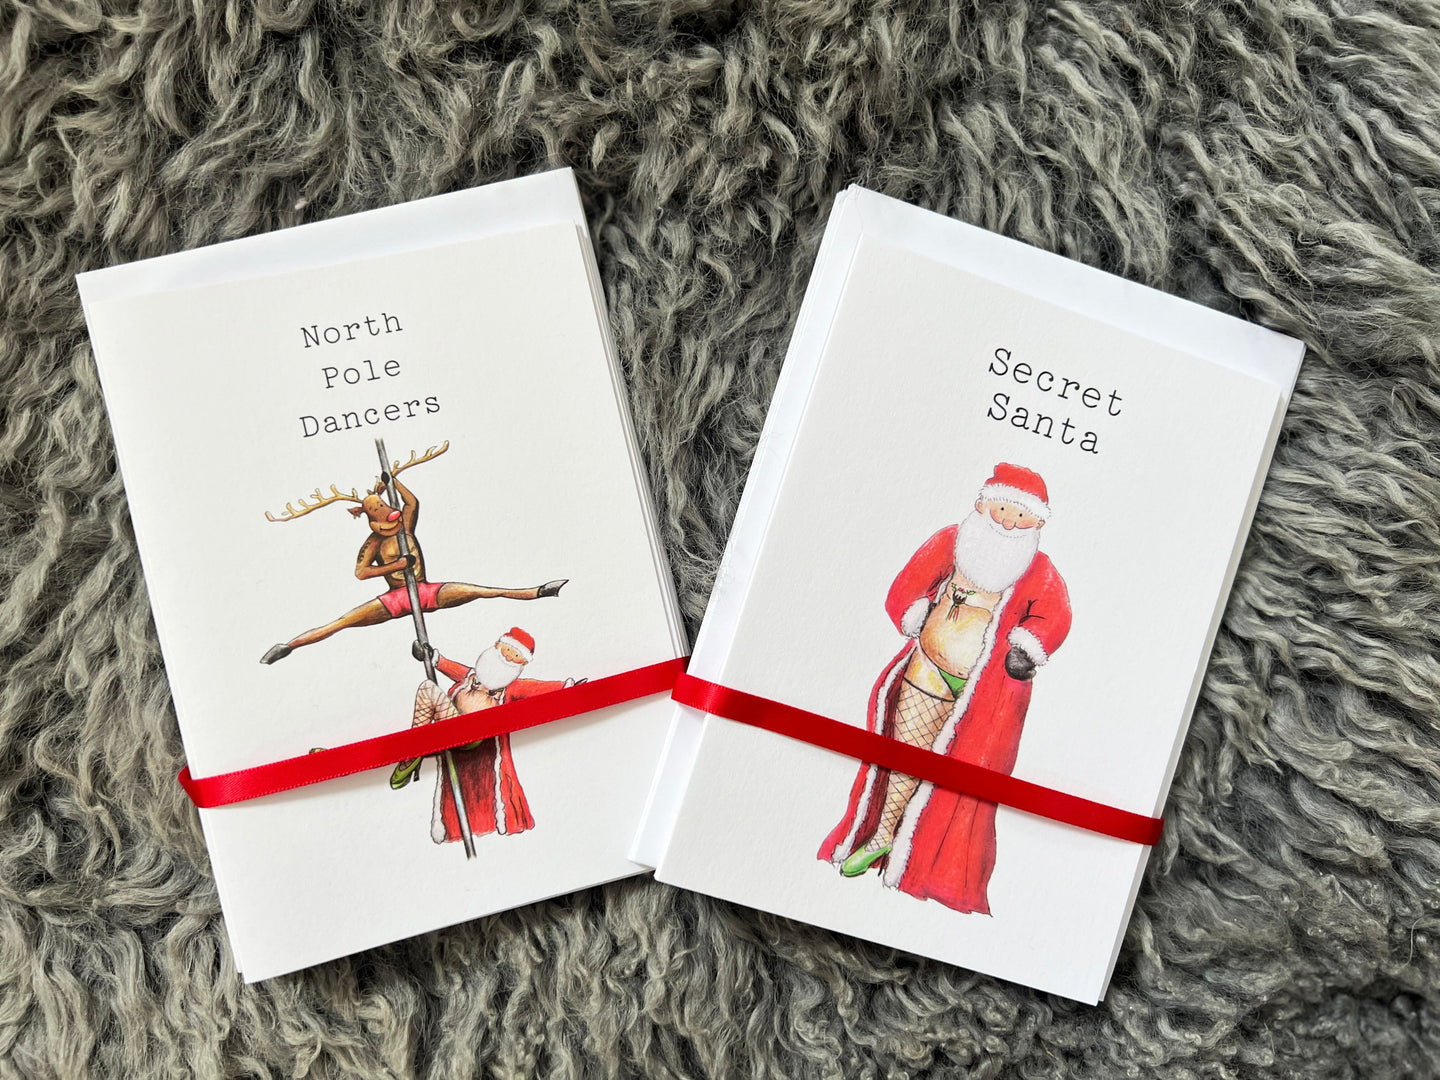 Mixed Multi Pack of 10 Christmas Cards (A6 size) NPD and Secret Santa Designs Lucy Hughes Creations 